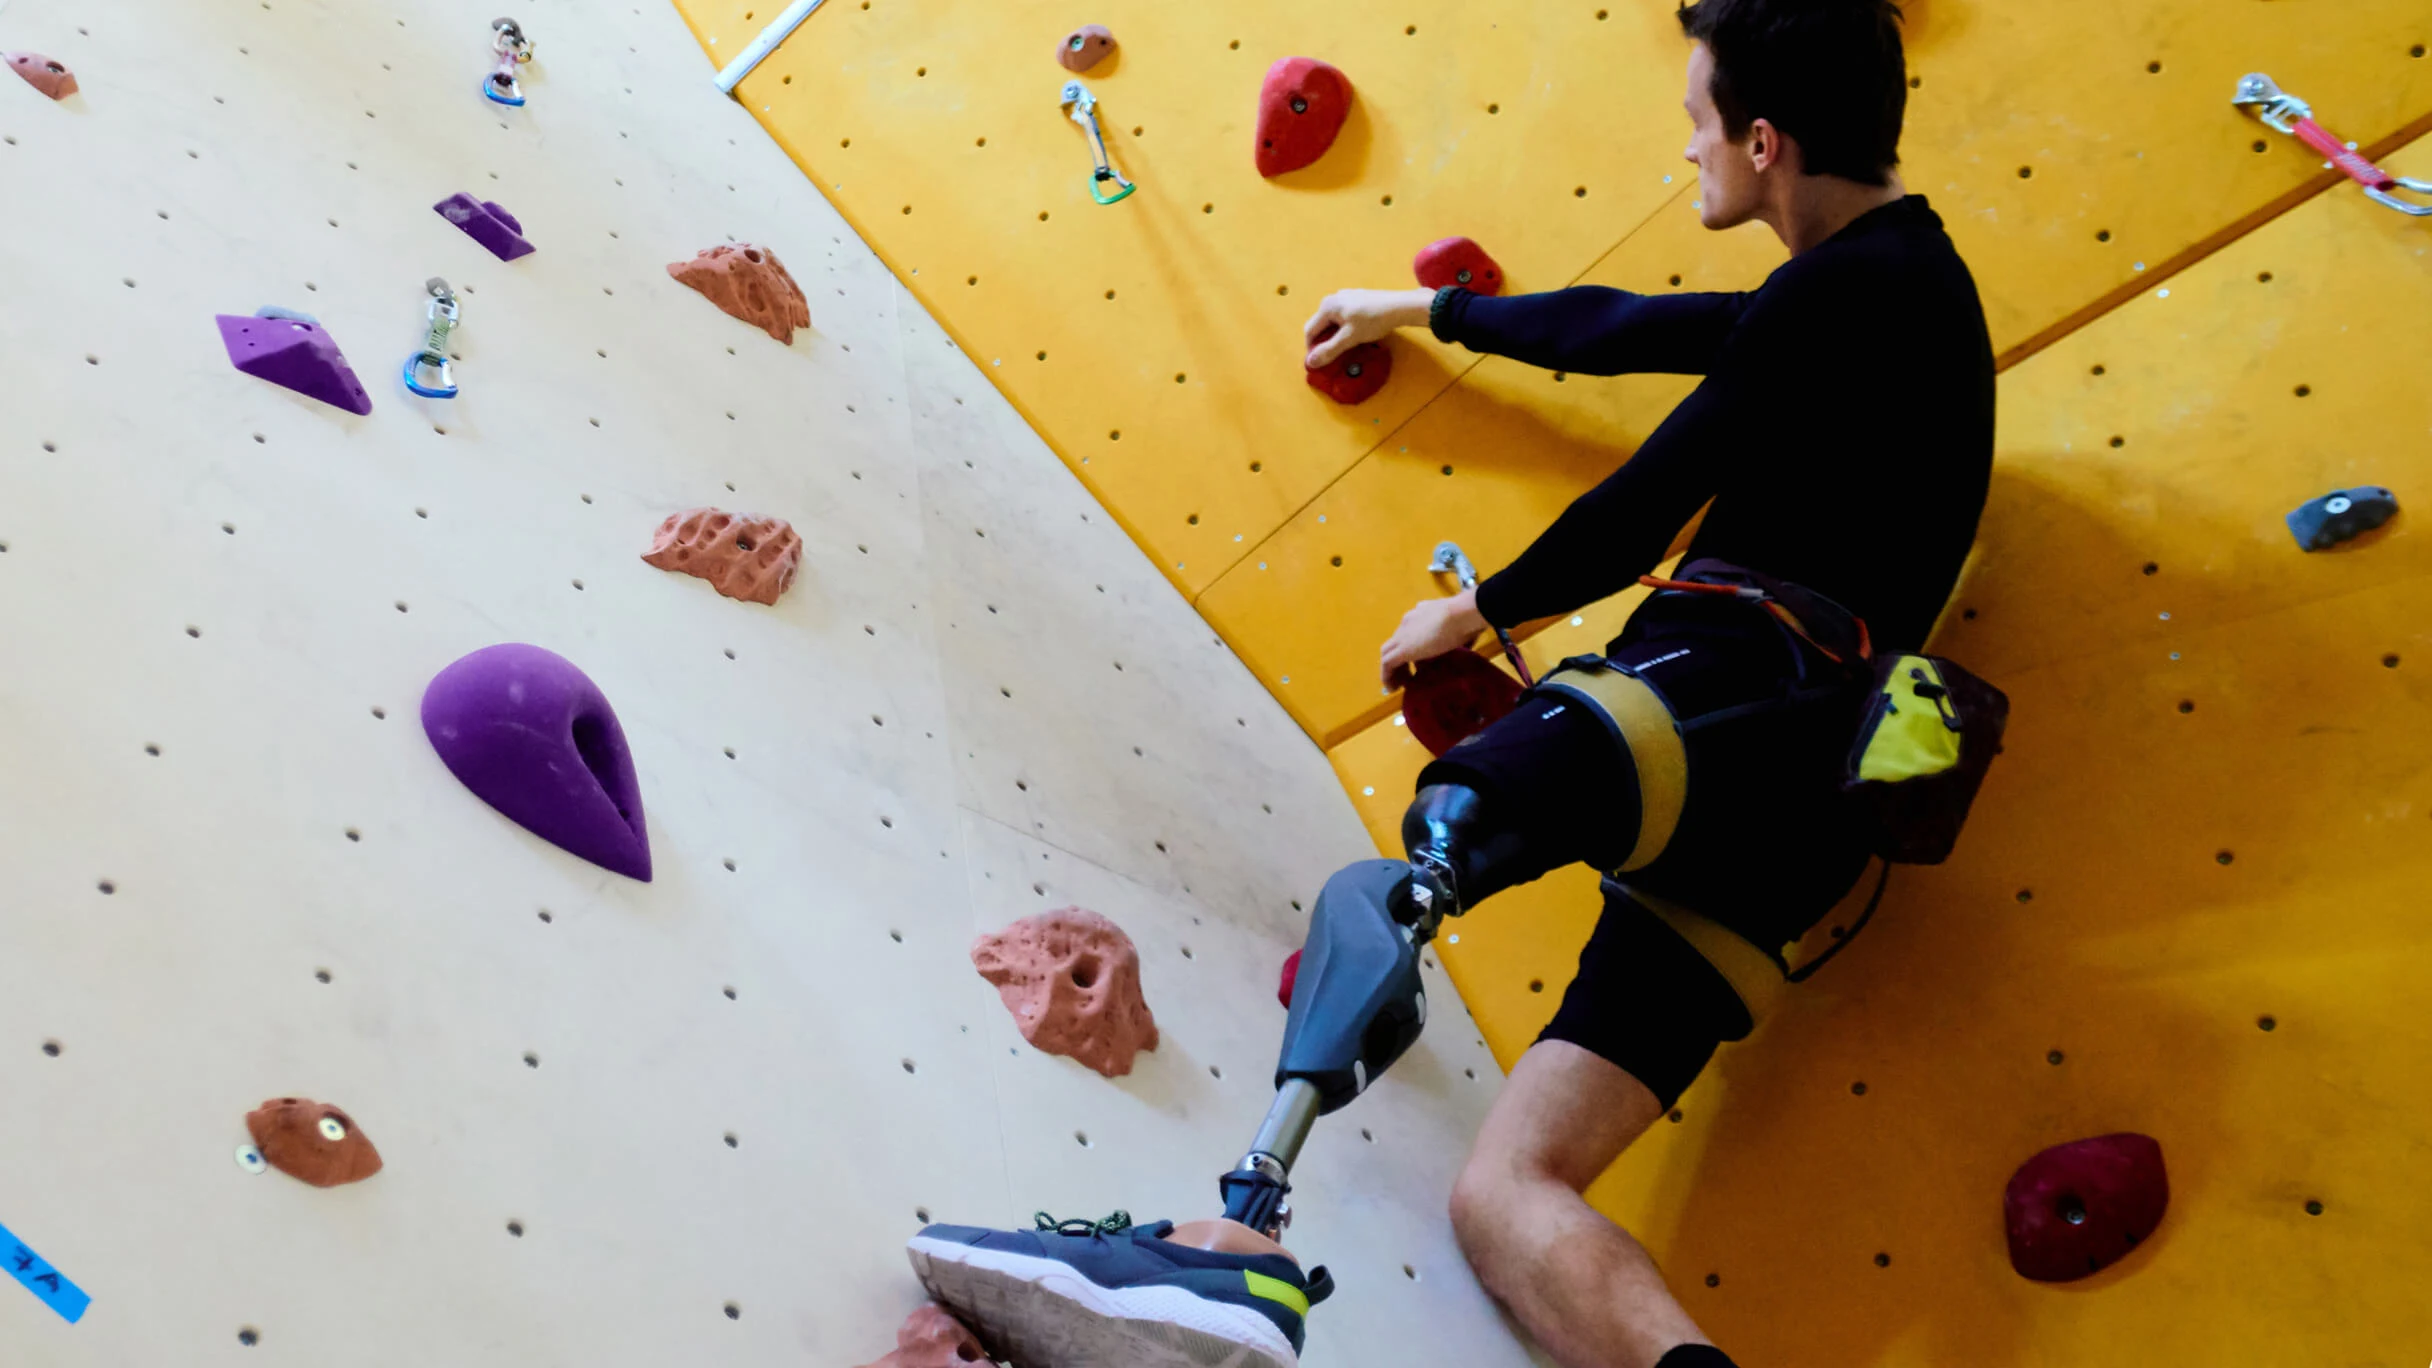 Man with prosthetic leg, dressed in black, ascends a colourful climbing wall